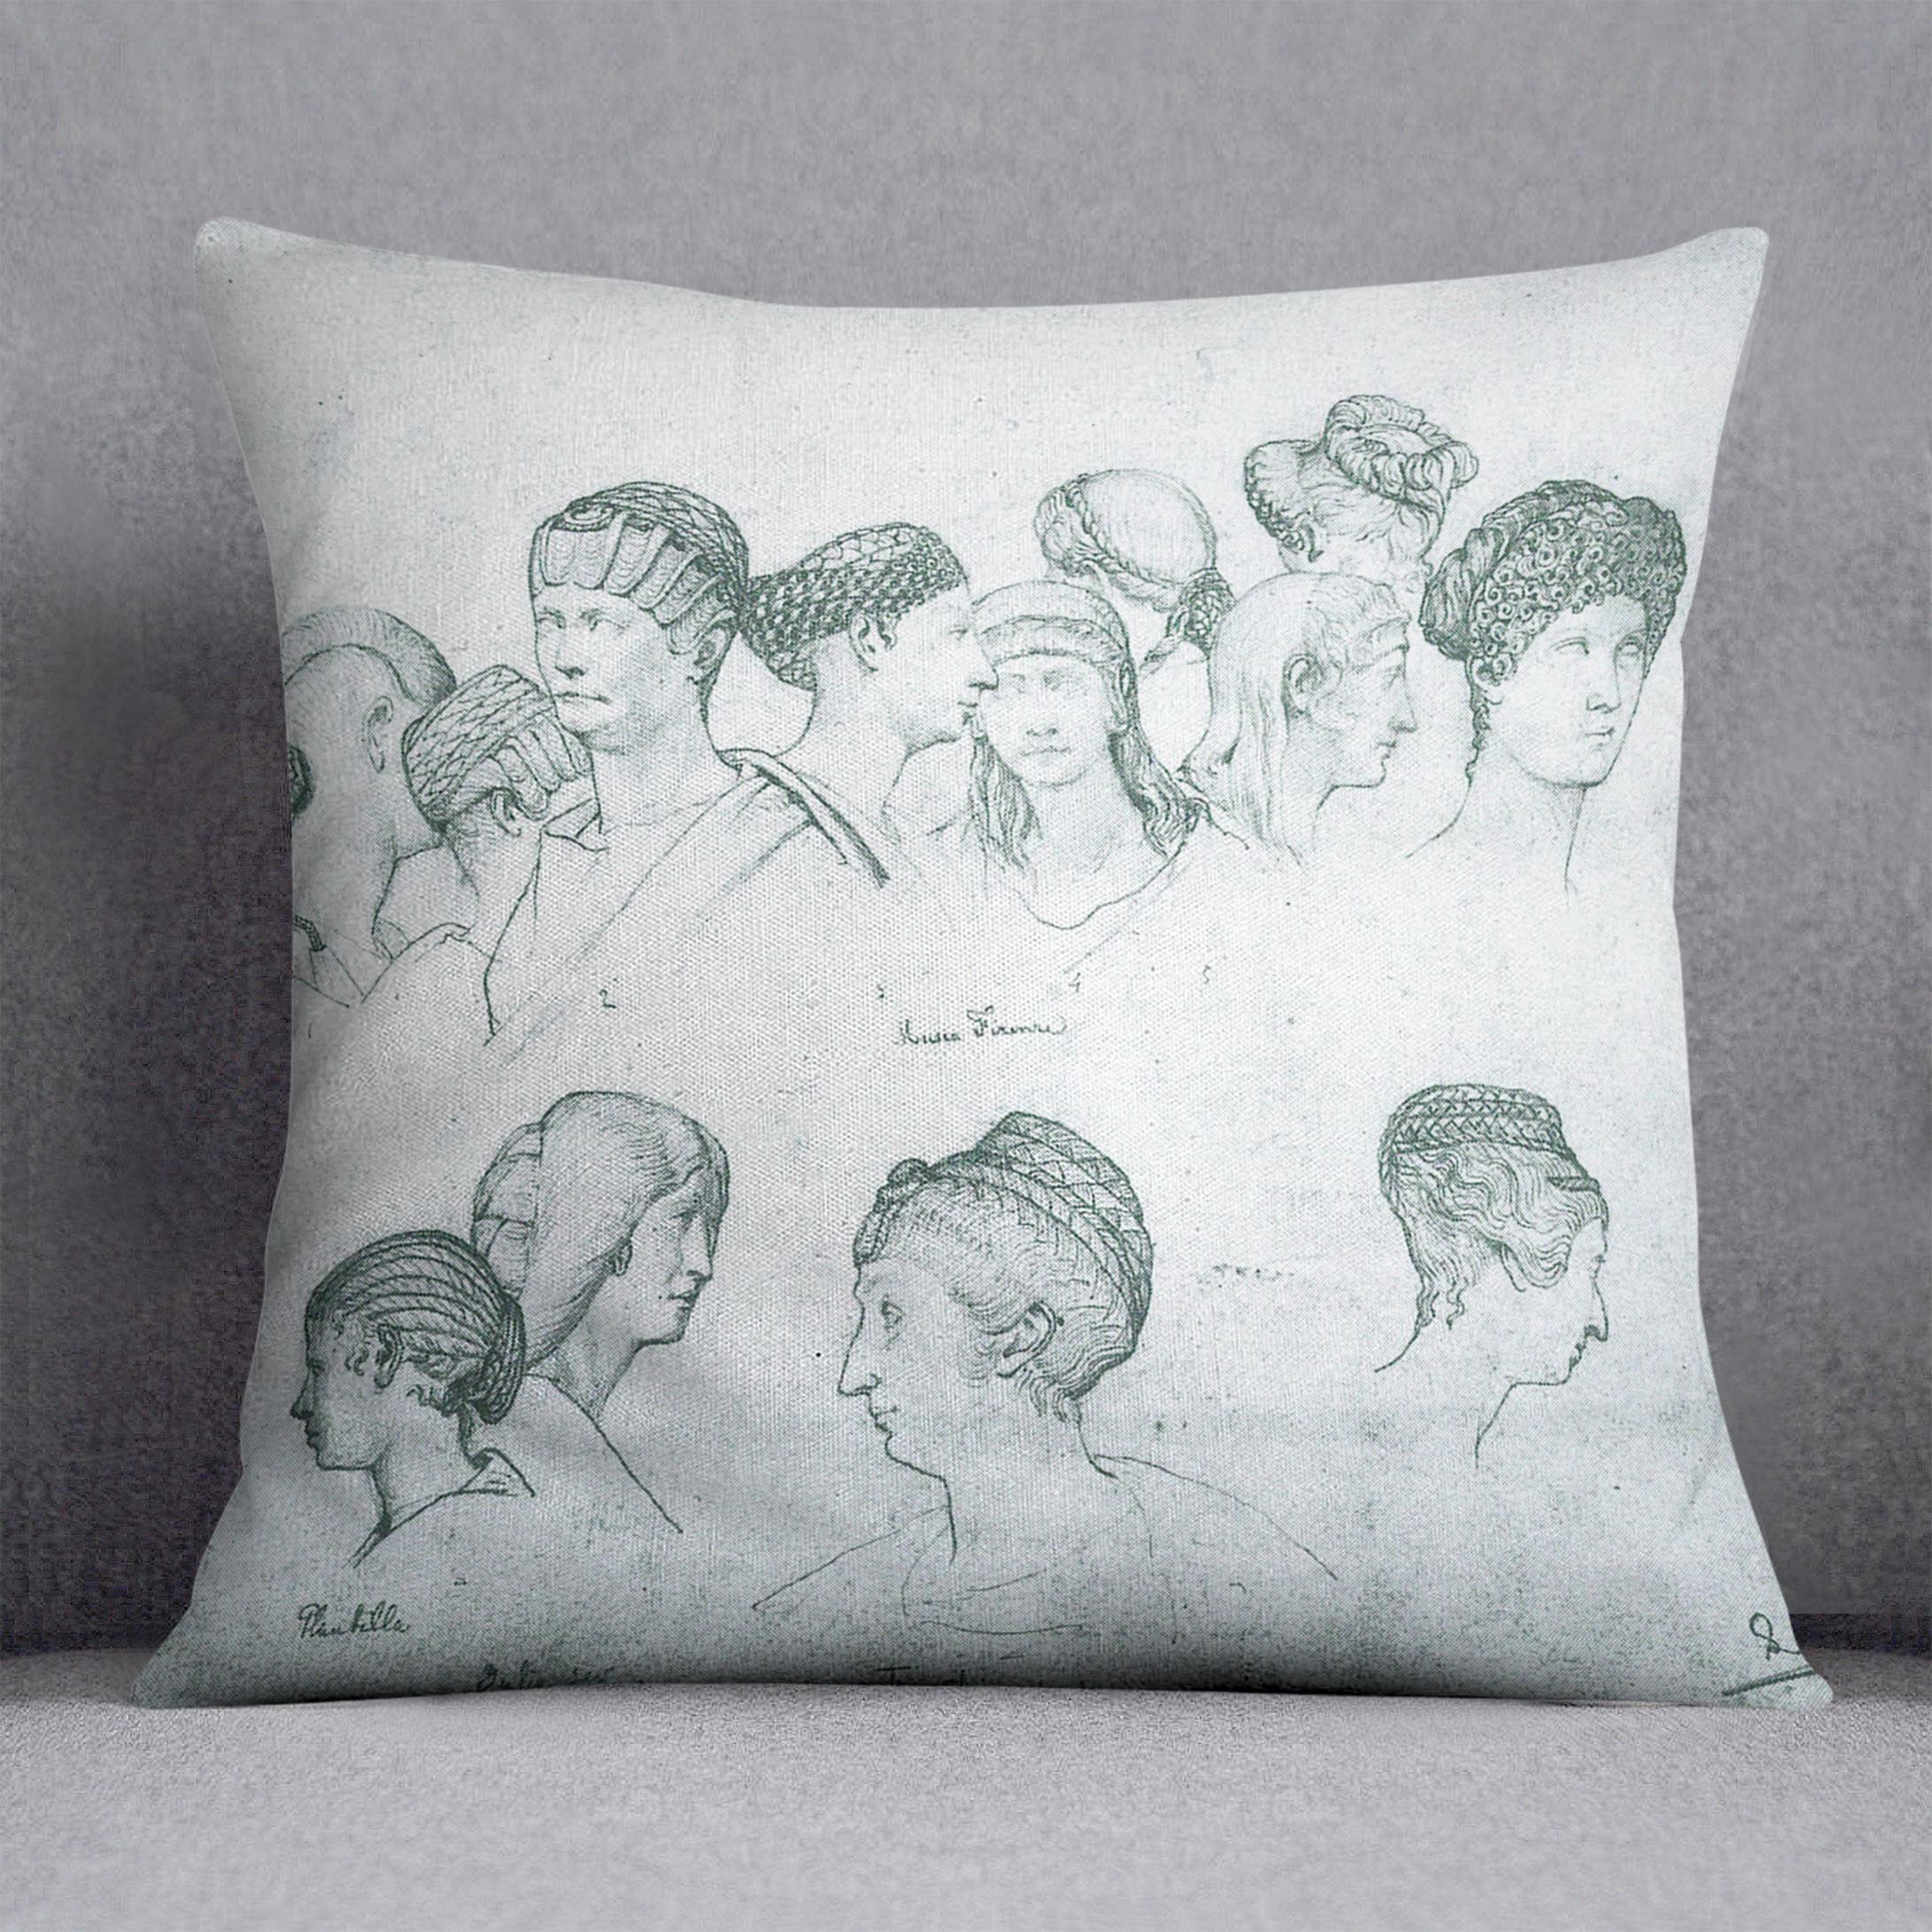 Sketch of hairstyles from ancient sculptures by Alma Tadema Cushion - Canvas Art Rocks - 1